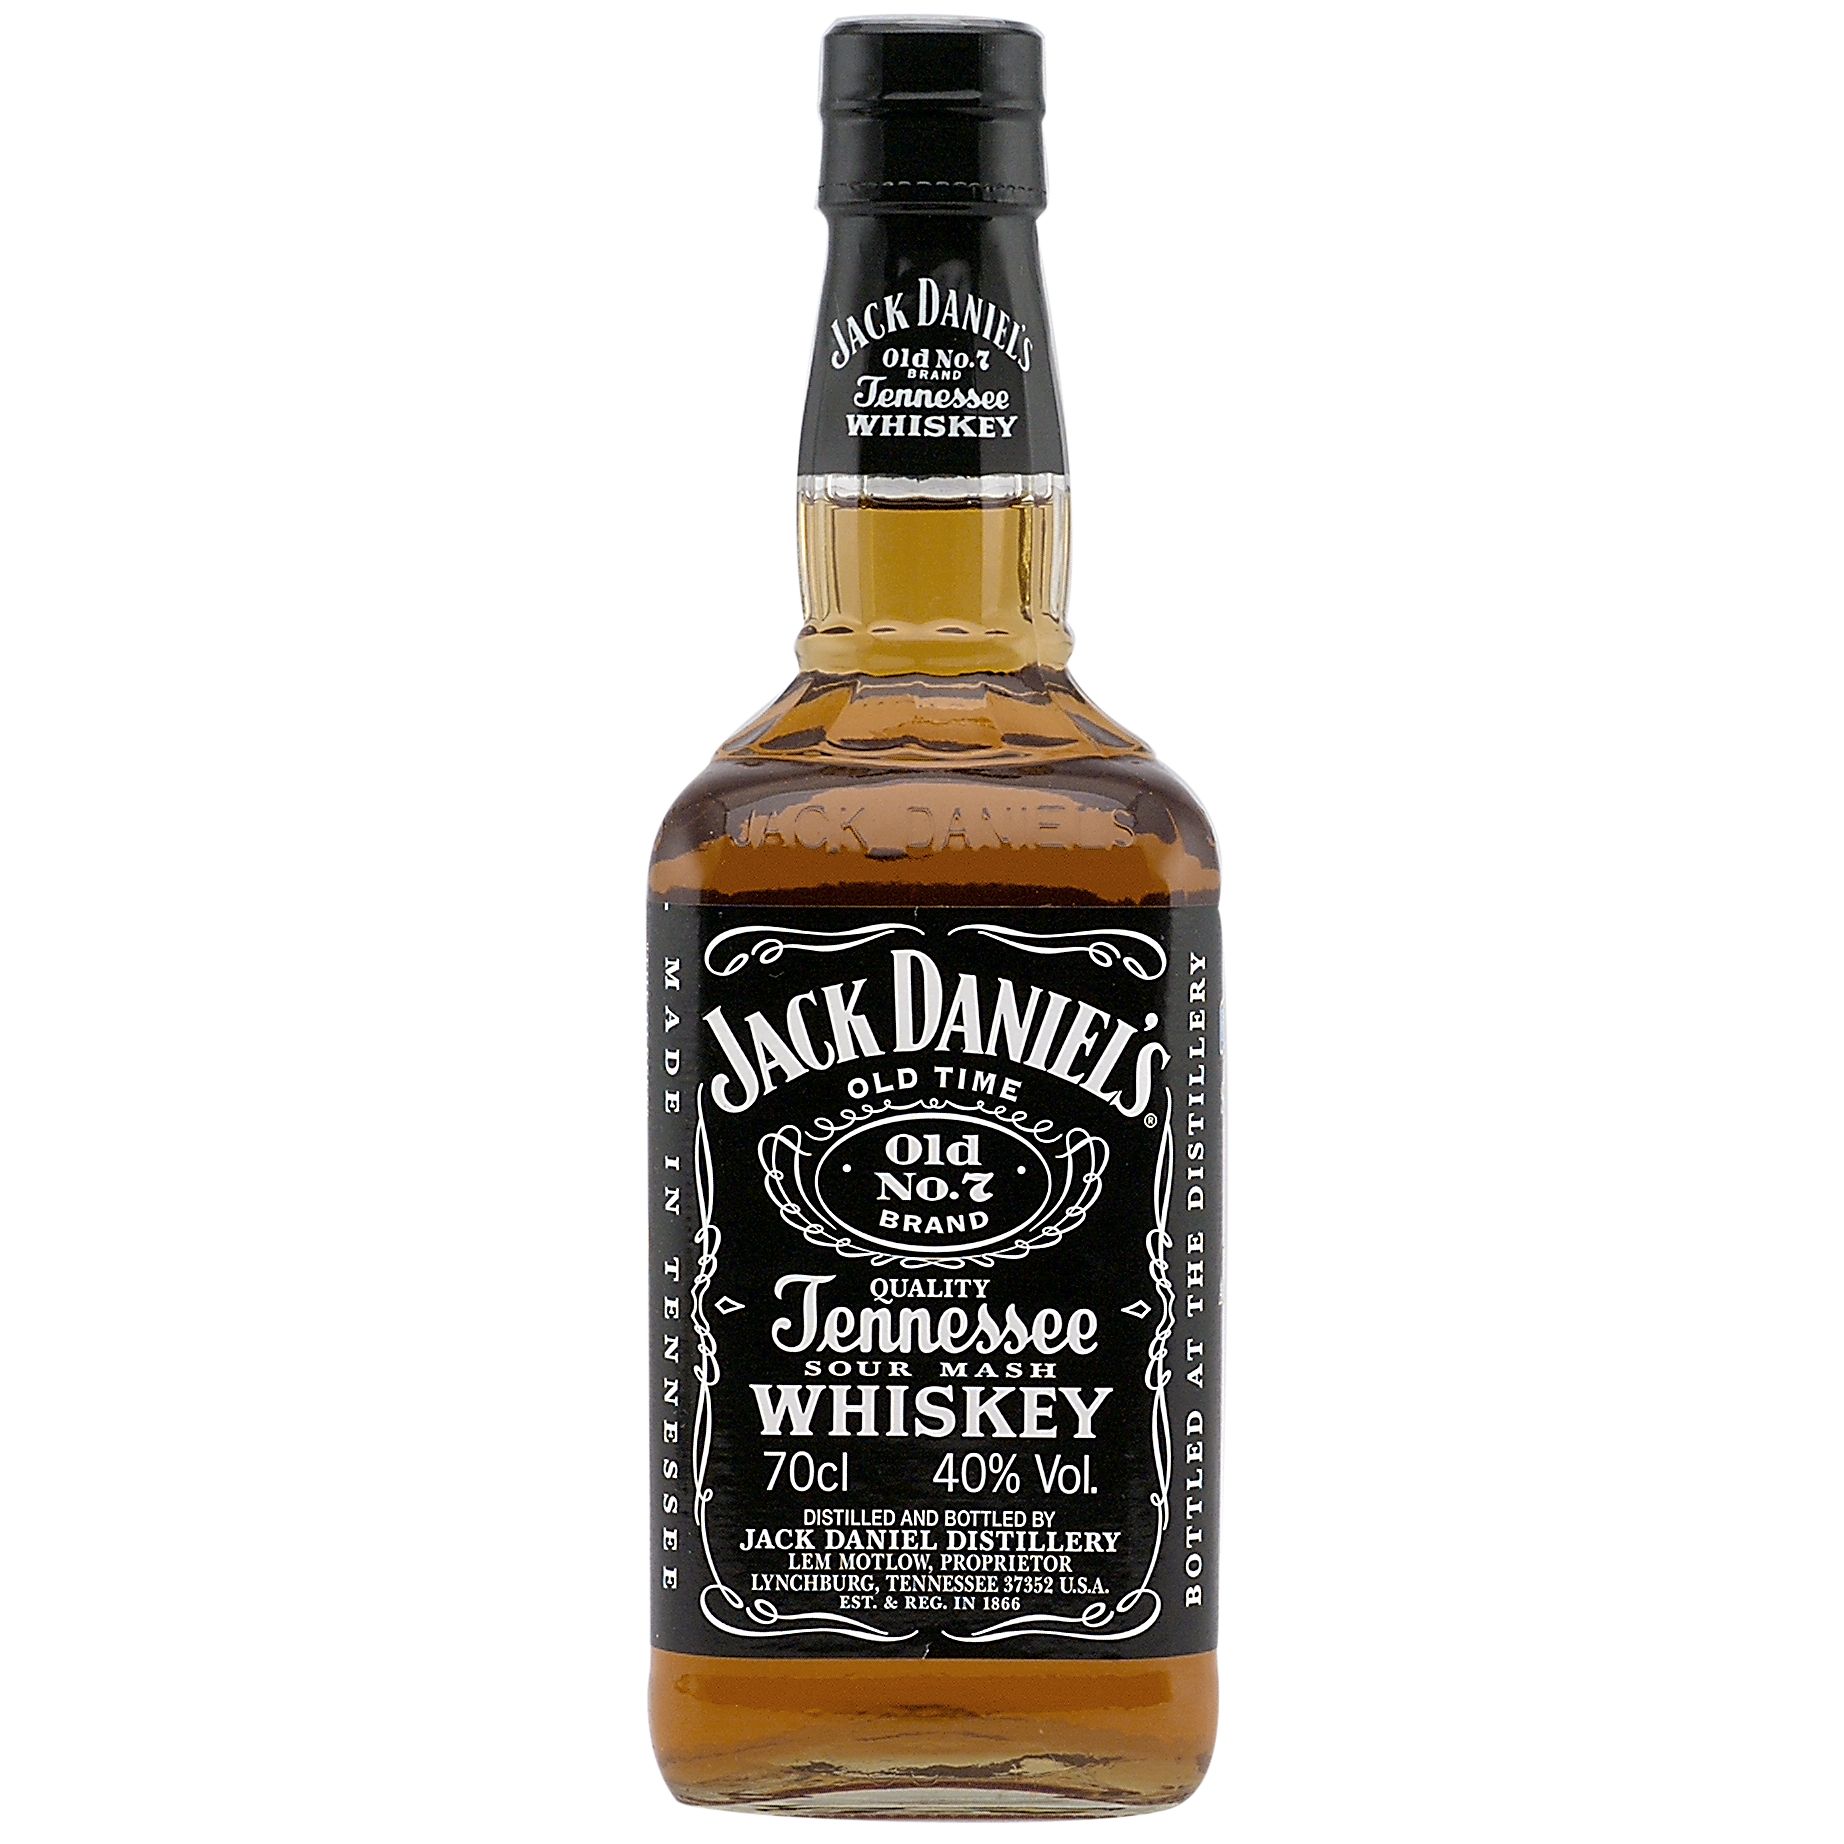 Jack Daniel's Tennessee Whiskey at John Lewis